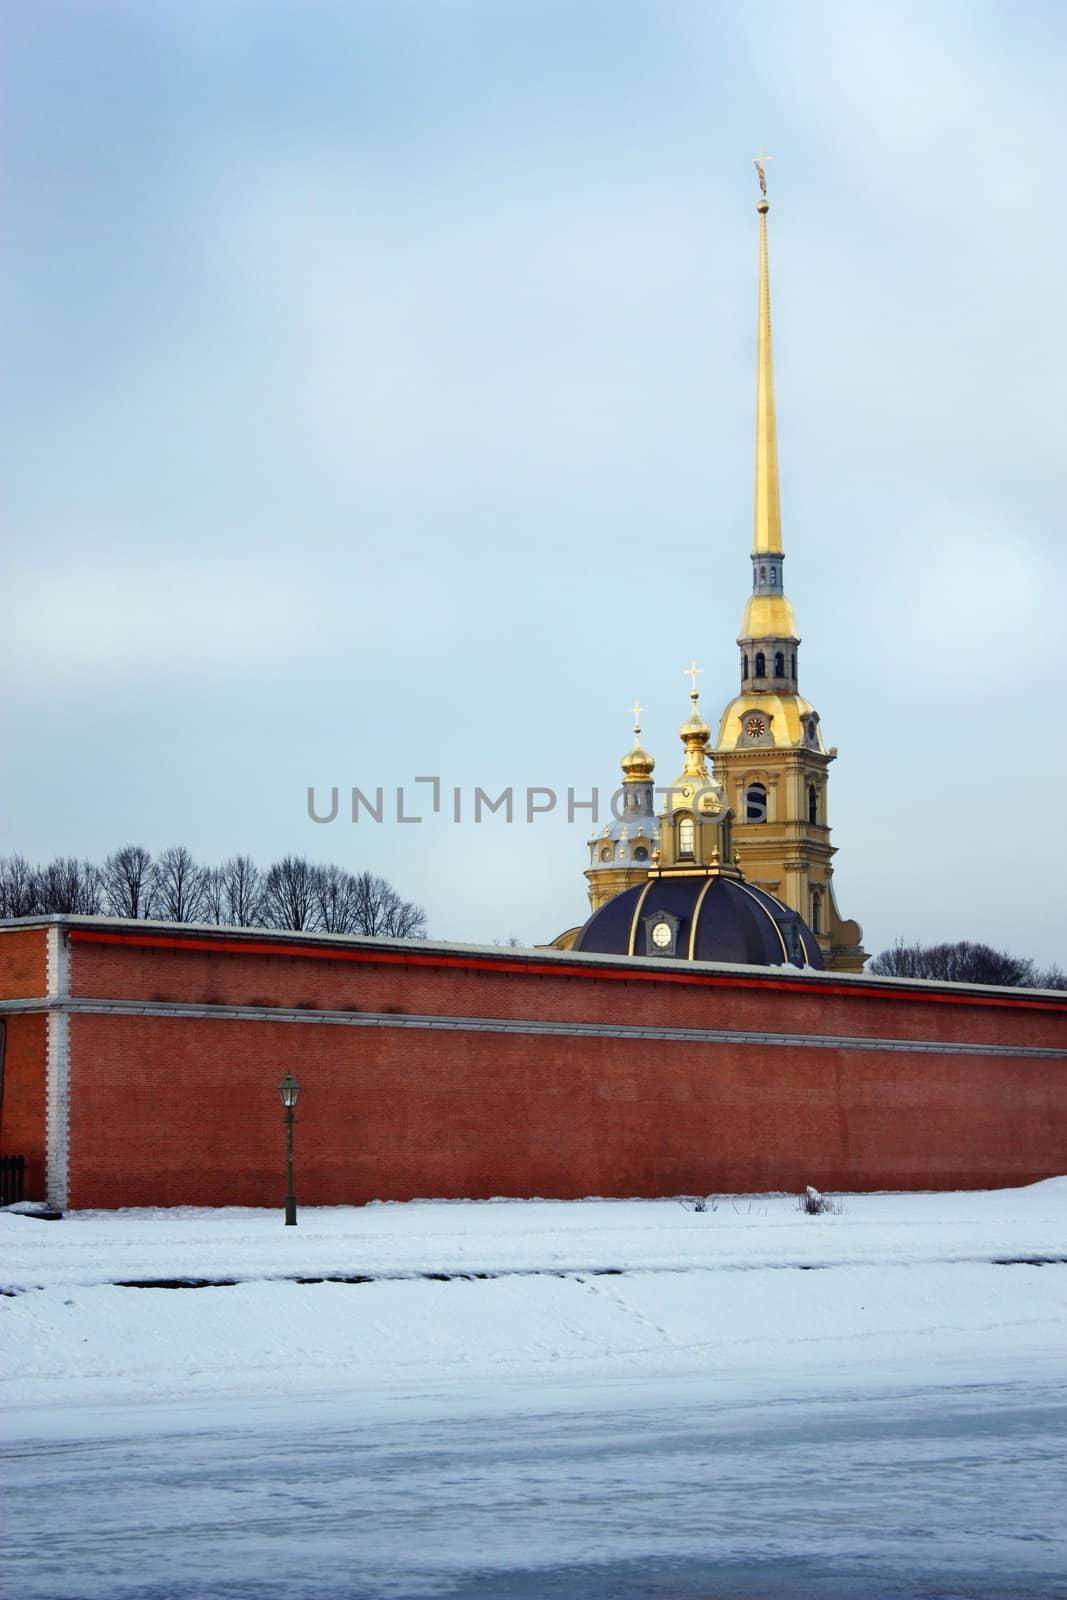 Peter and Paul Fortress, the bridge with a lantern, a fence on the bridge, gloss spire and domes, symbol of Russia, a symbol of St. Petersburg